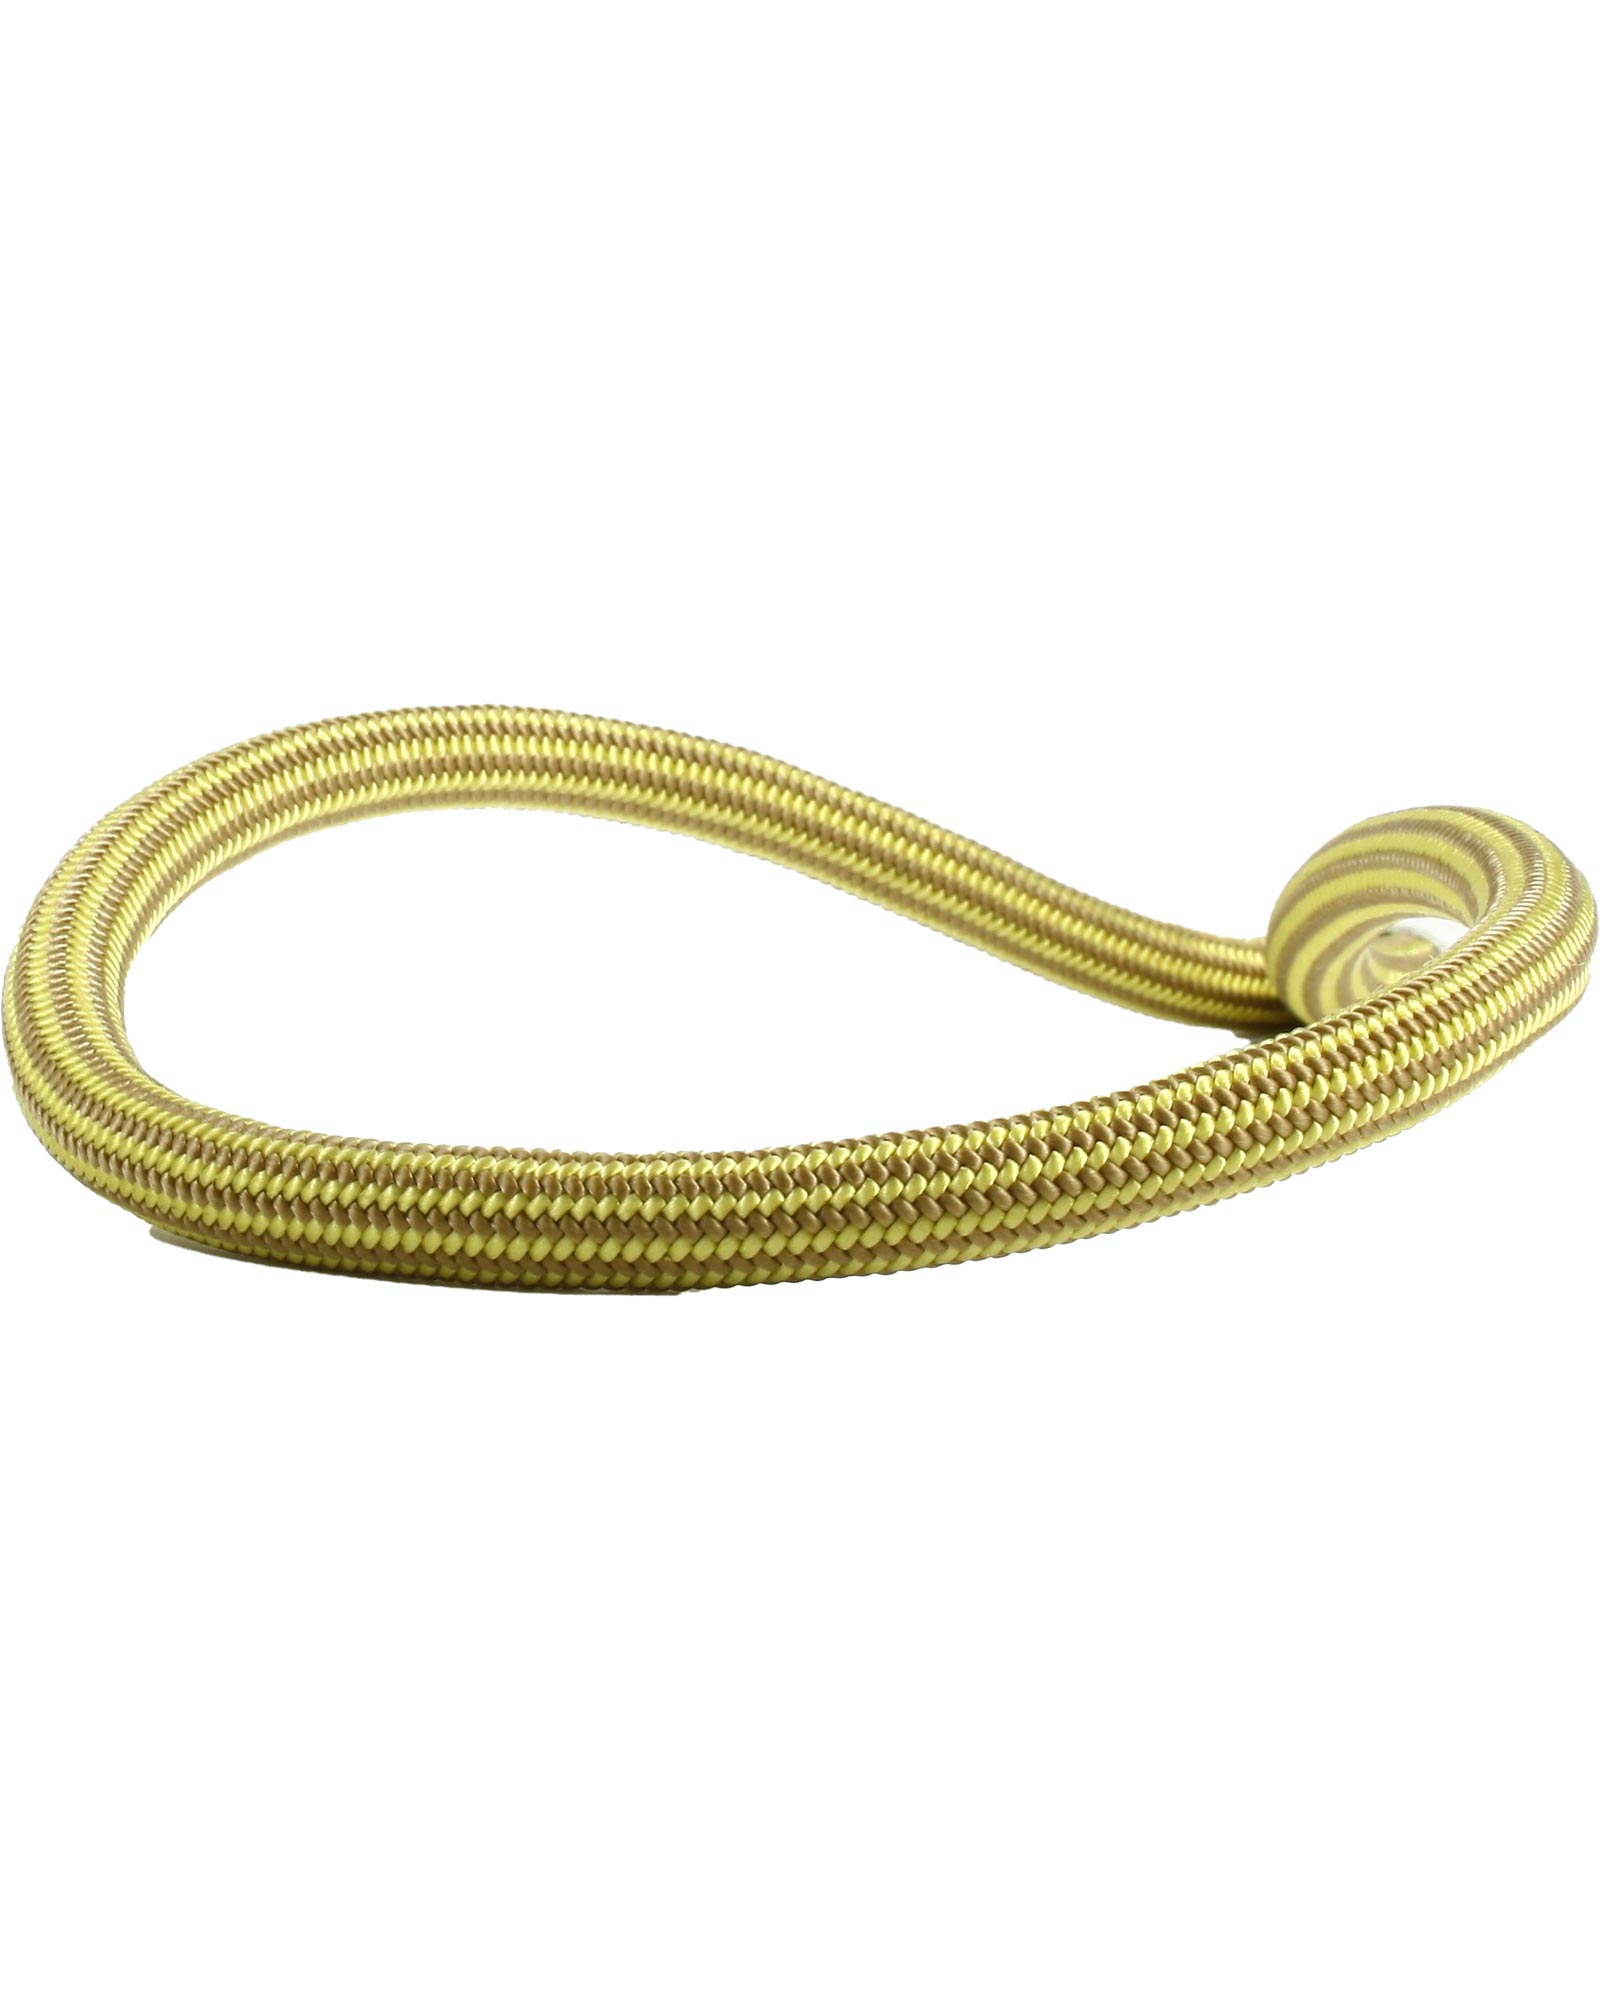 Edelweiss Lithium 8.5mm x 60m Rope 0